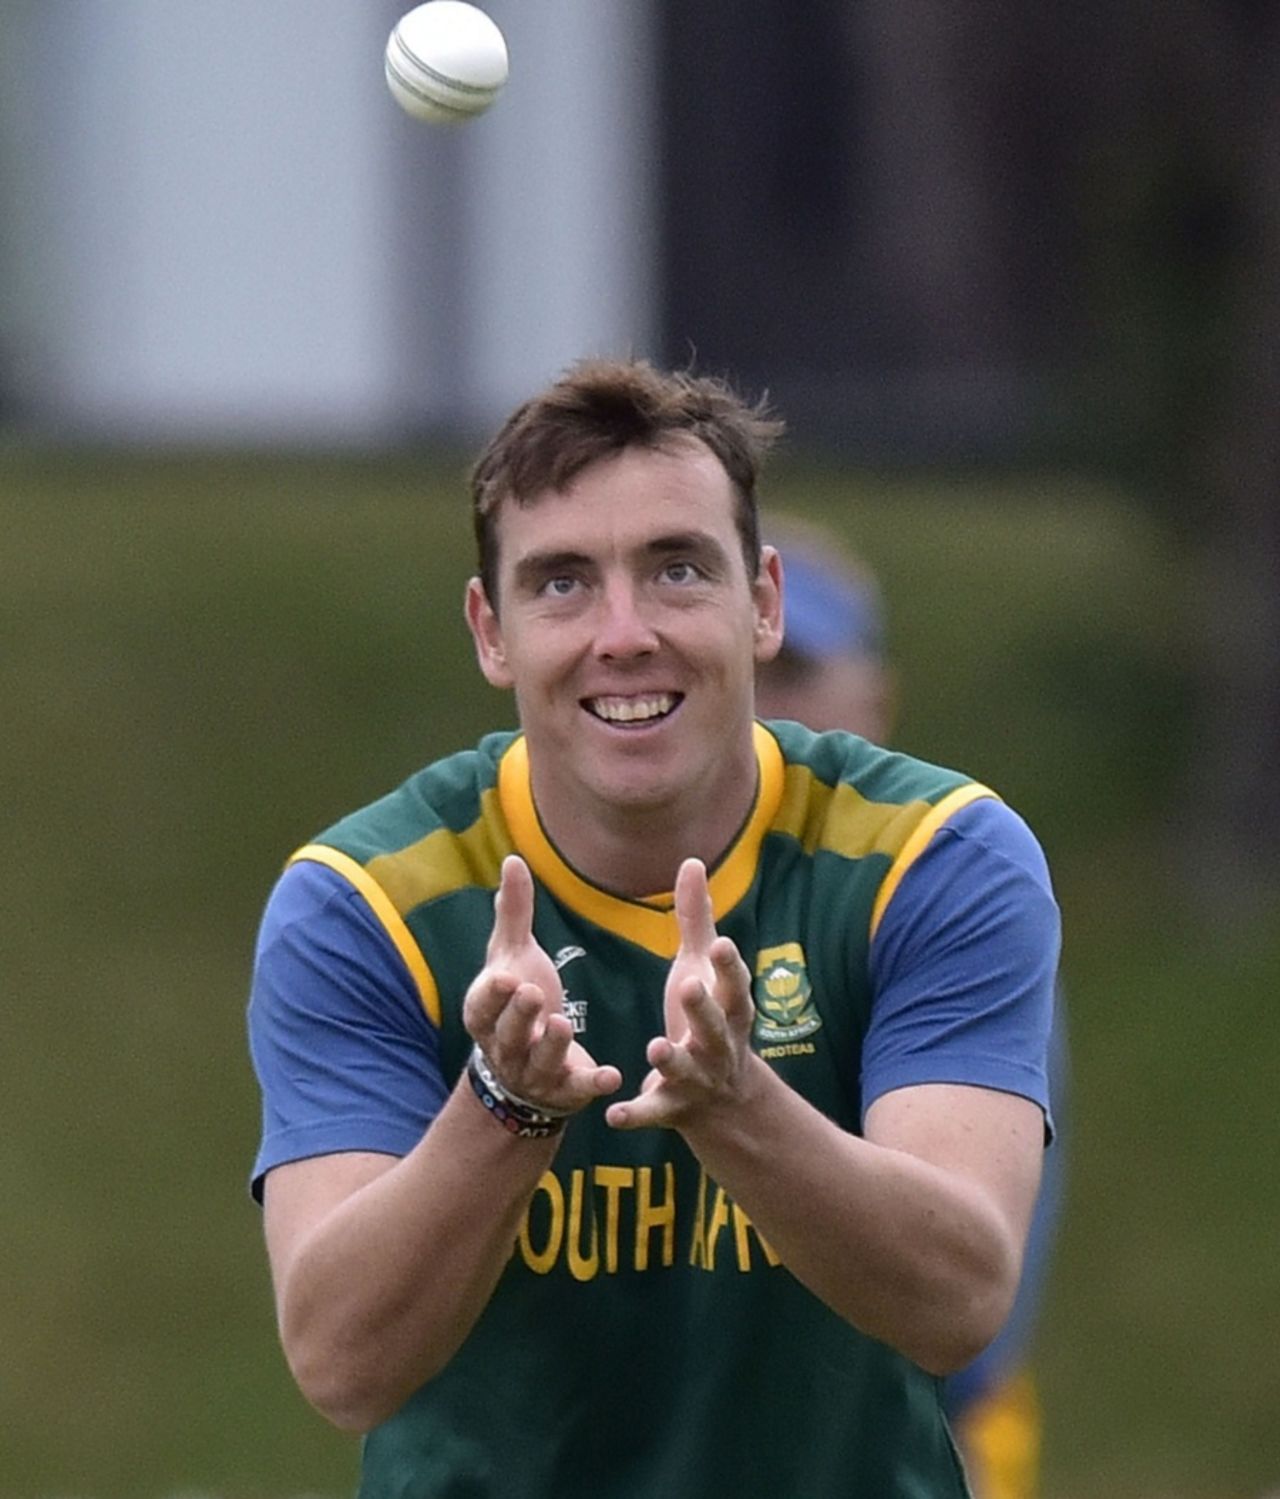 Kyle Abbott lines himself up for a catch, World Cup 2015, Wellington, March 11, 2015